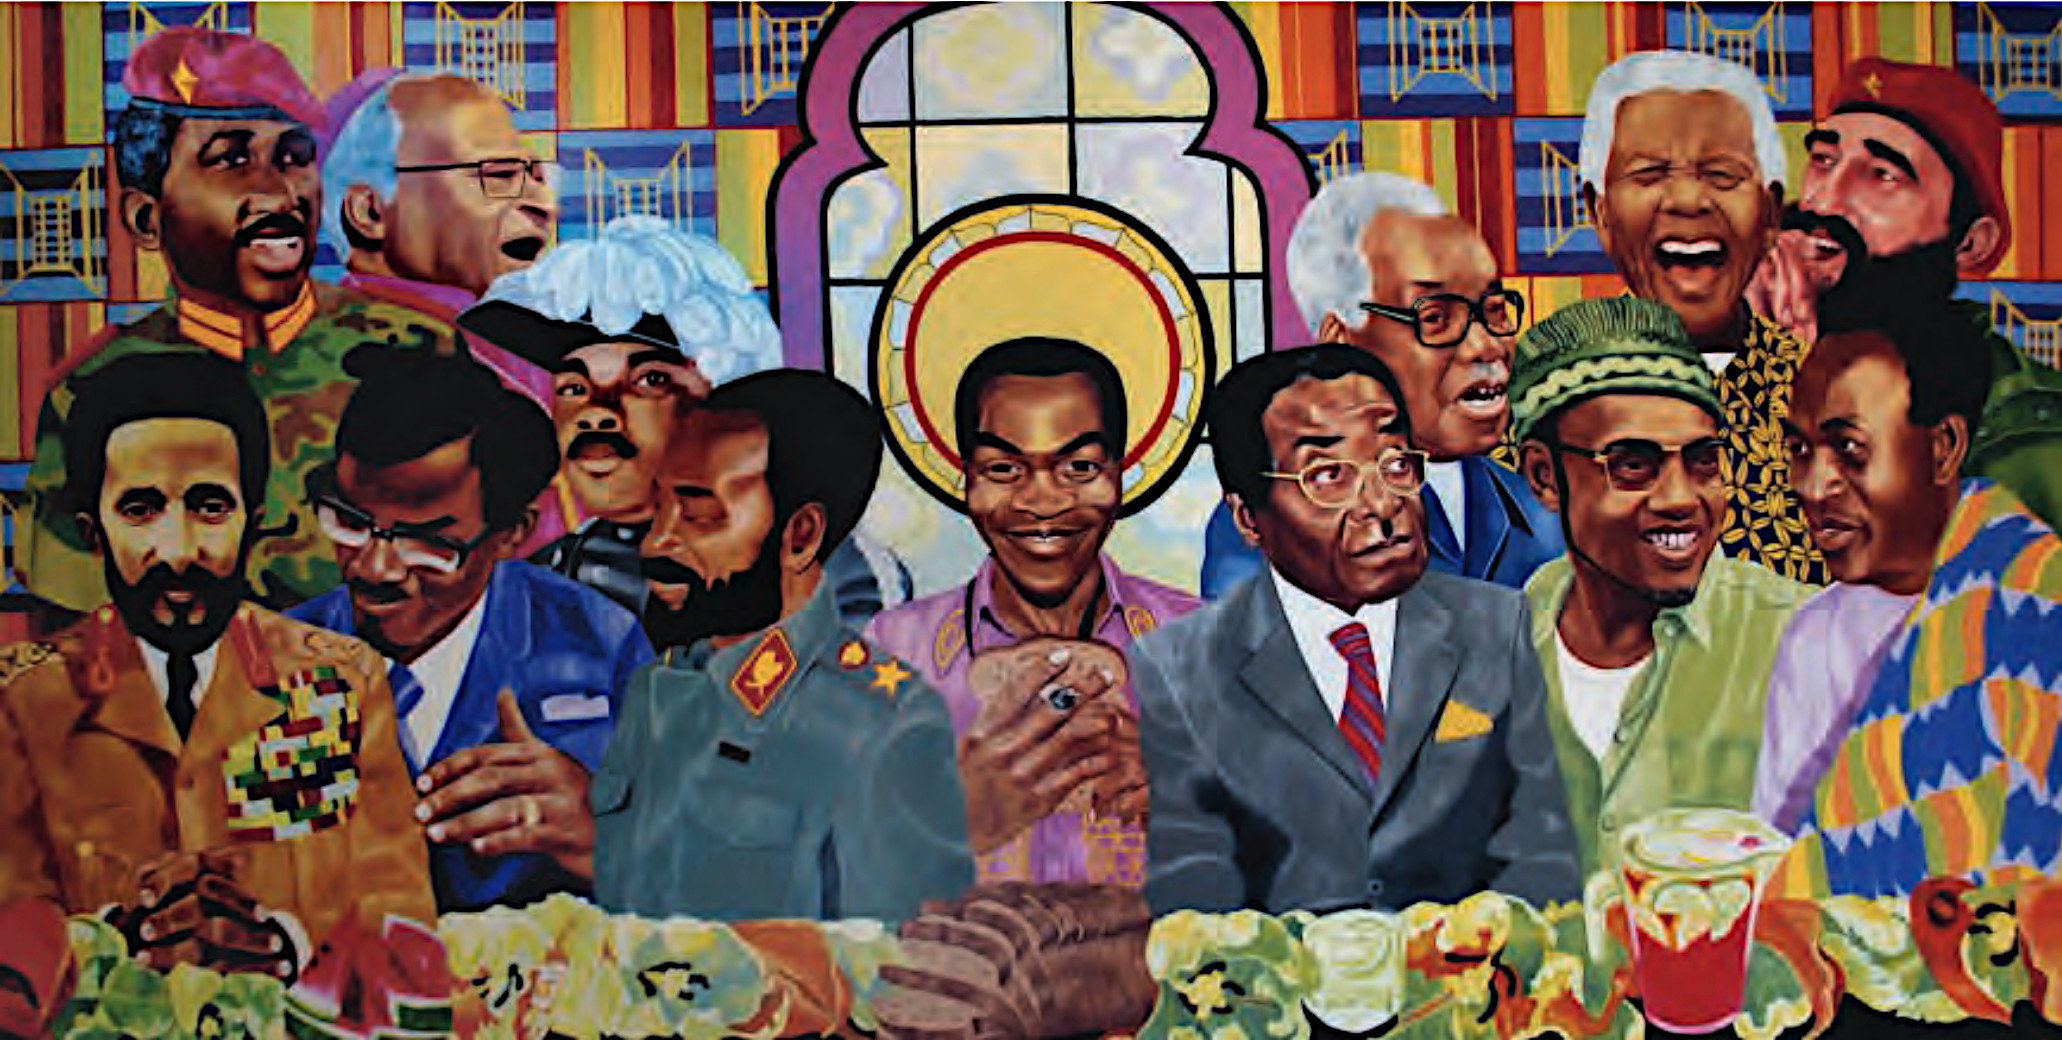 The Last Supper, 2014, by Paul Ndema. Courtesy of the Sindika Dokolo Collection
